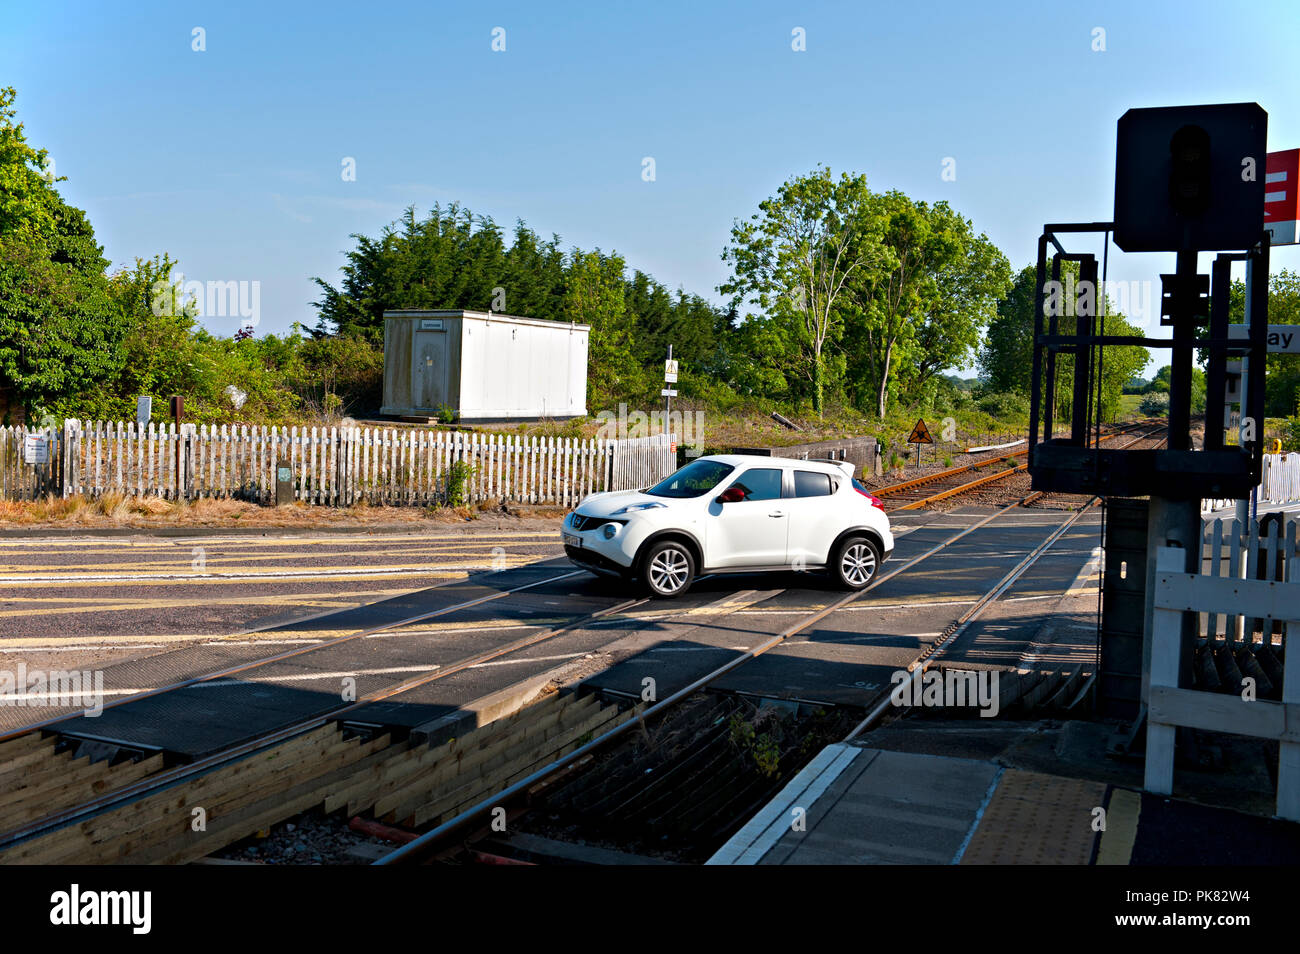 Darsham Railway Station on the East Suffolk line between Ipswich and Lowestoft in Suffolk, UK. Stock Photo